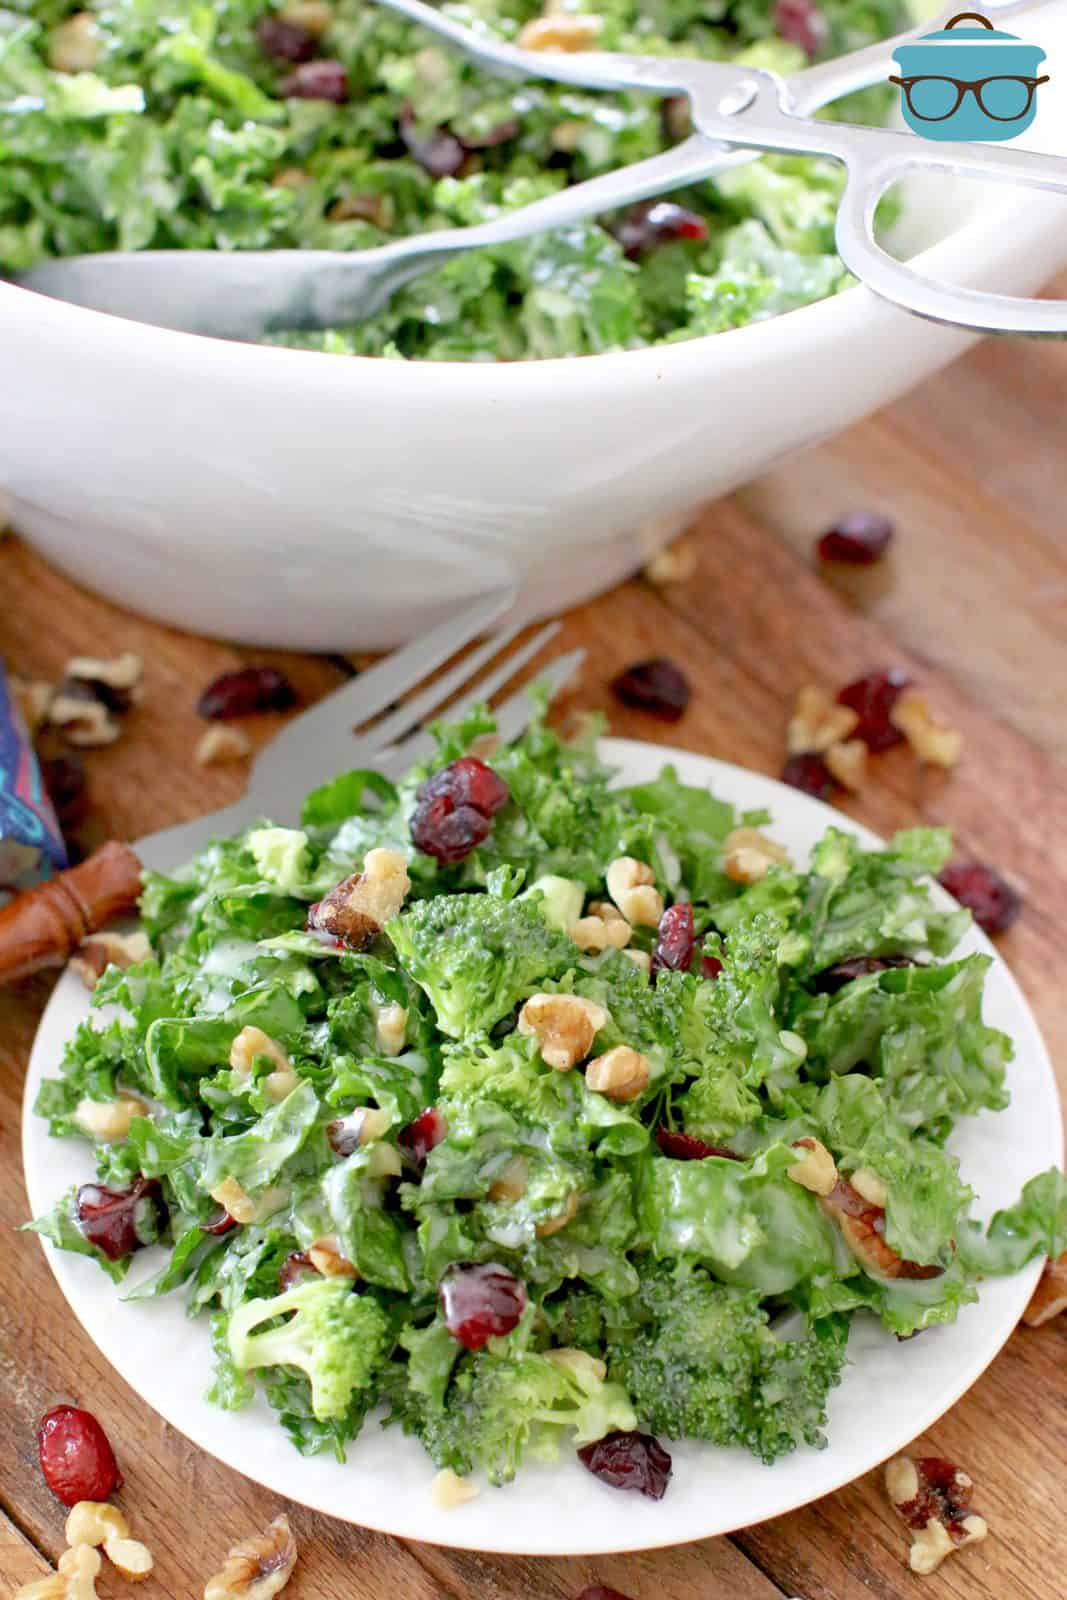 kale salad shown on a small round white plate with a white bowl in the background sit-in on a wood surface.